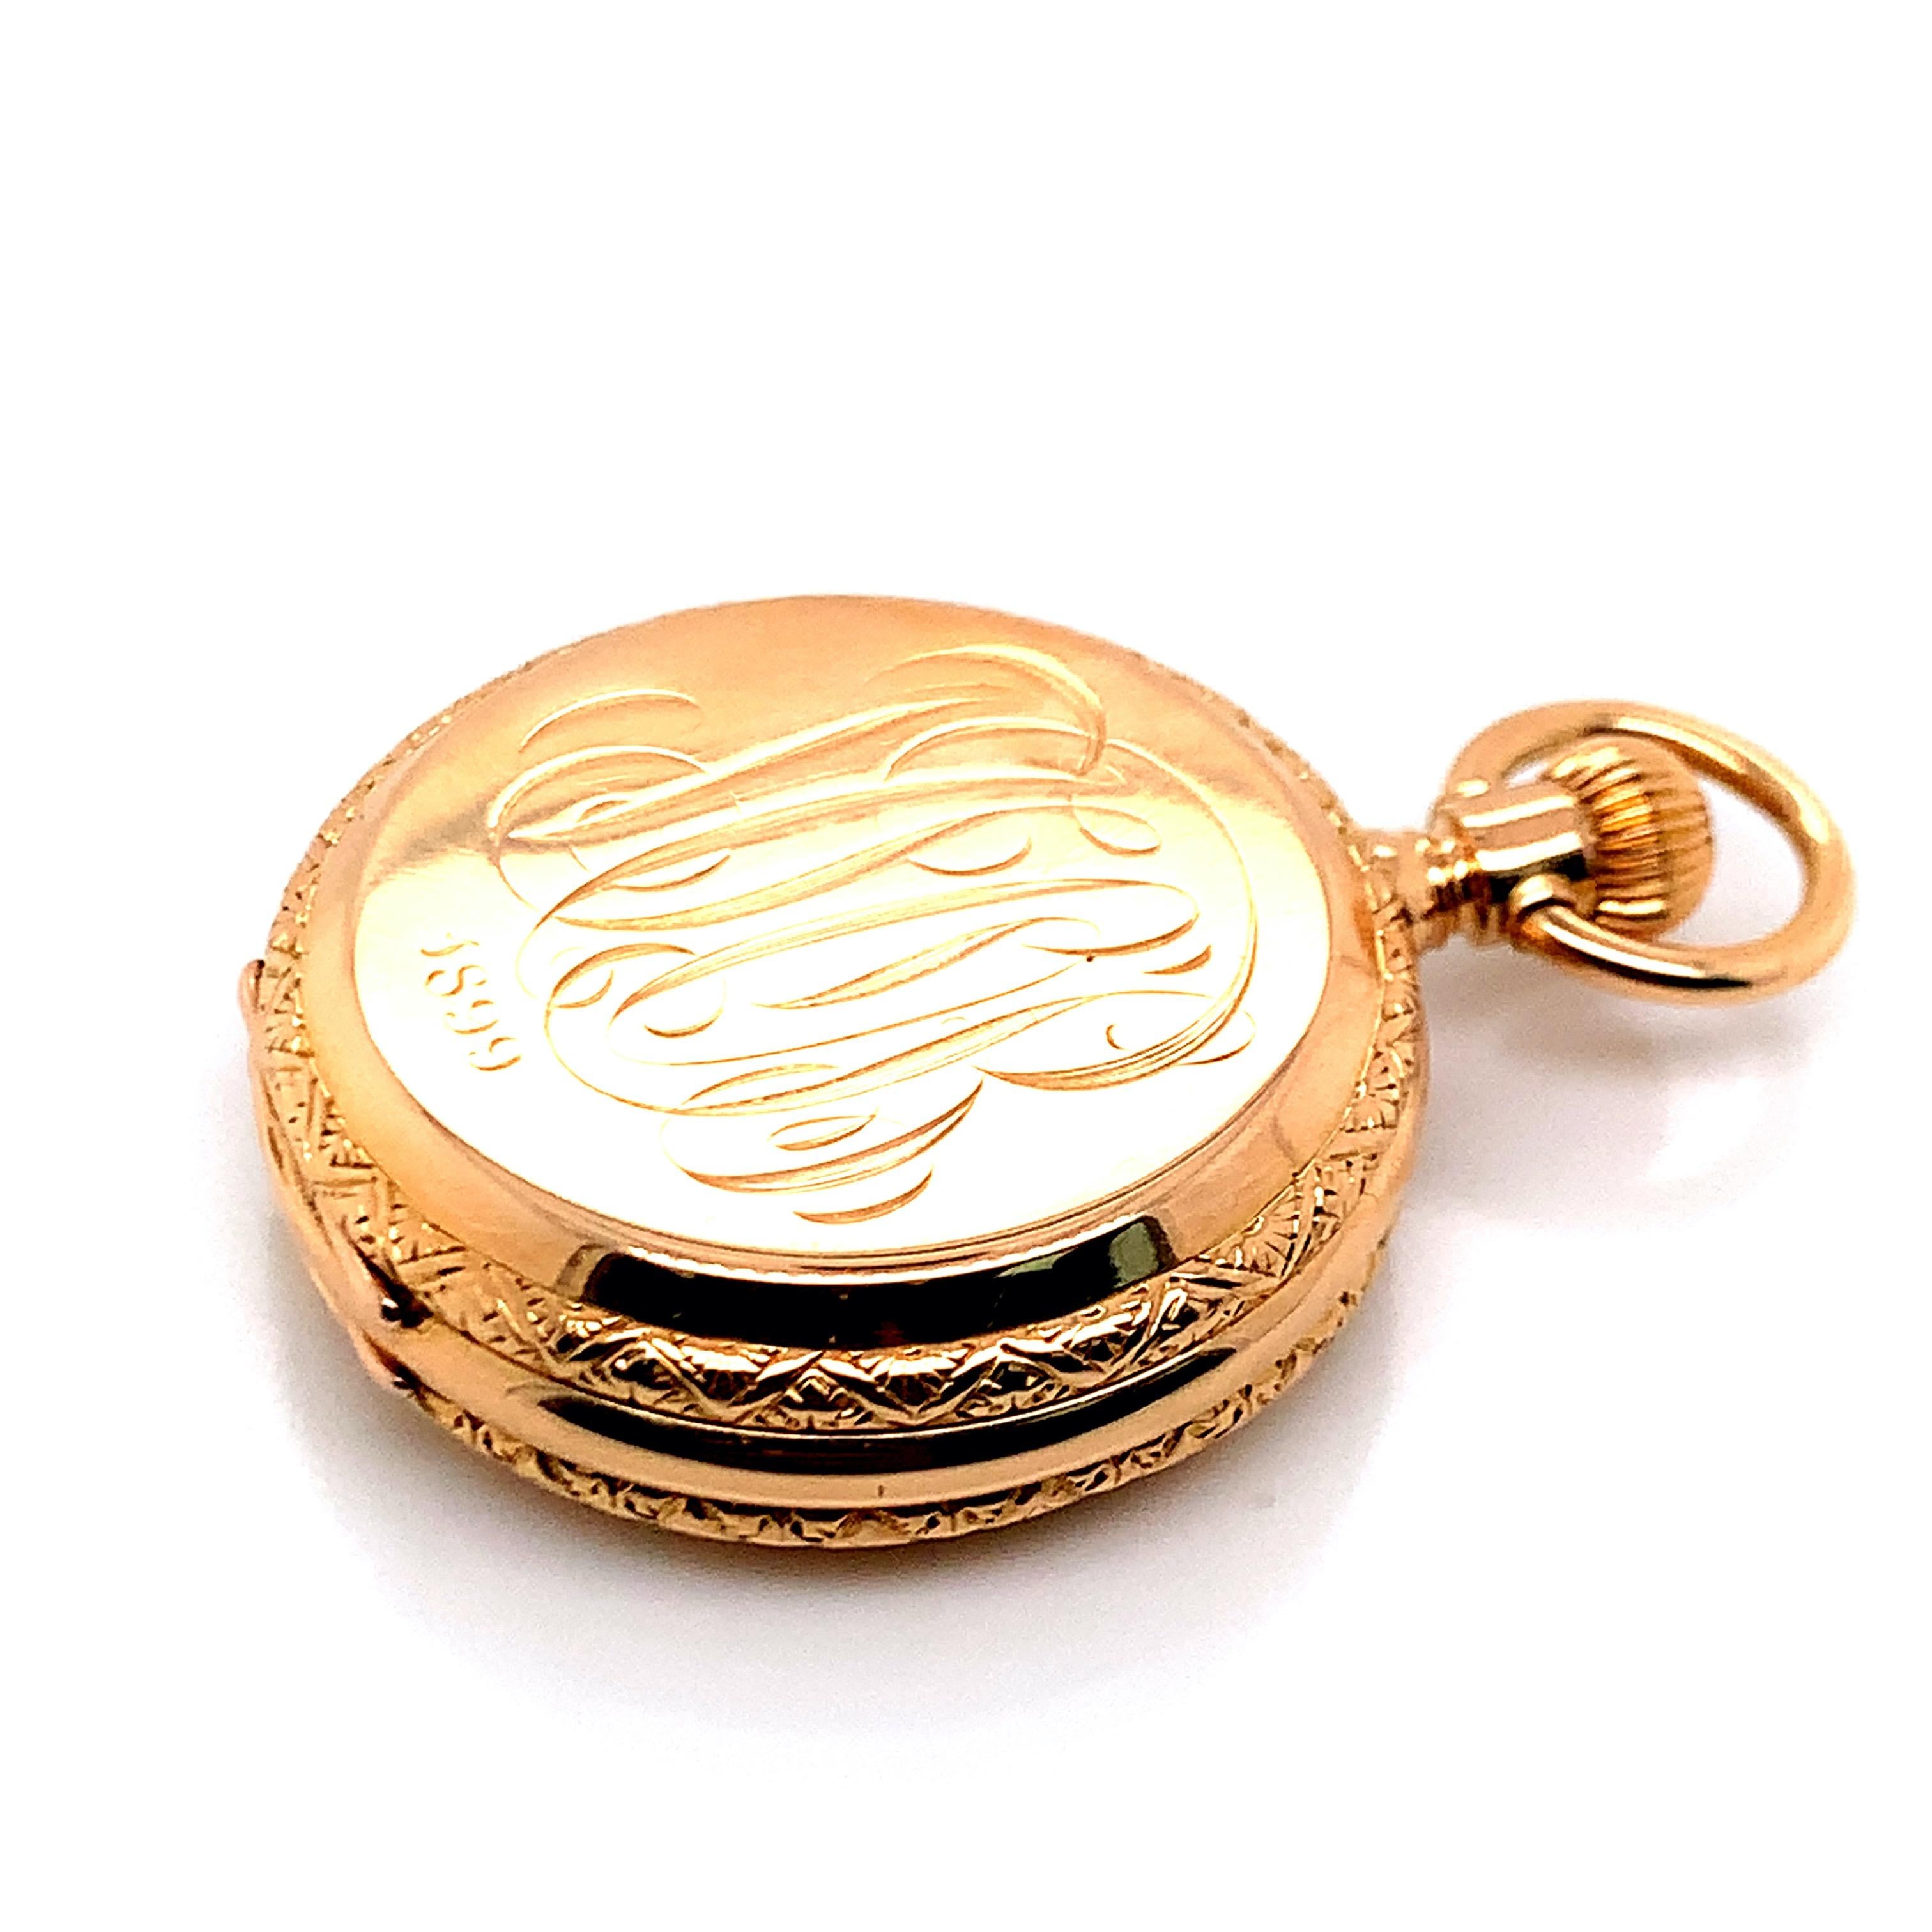 A two-sided Tiffany & Co. gold pocket watch.

- Signed Tiffany & Co. New York
- 1899
- Serial No. 99103
- Weight: 44.5 grams
- Length and width: 3.5 cm

Please note that it is not guaranteed for the watch to be keeping time.